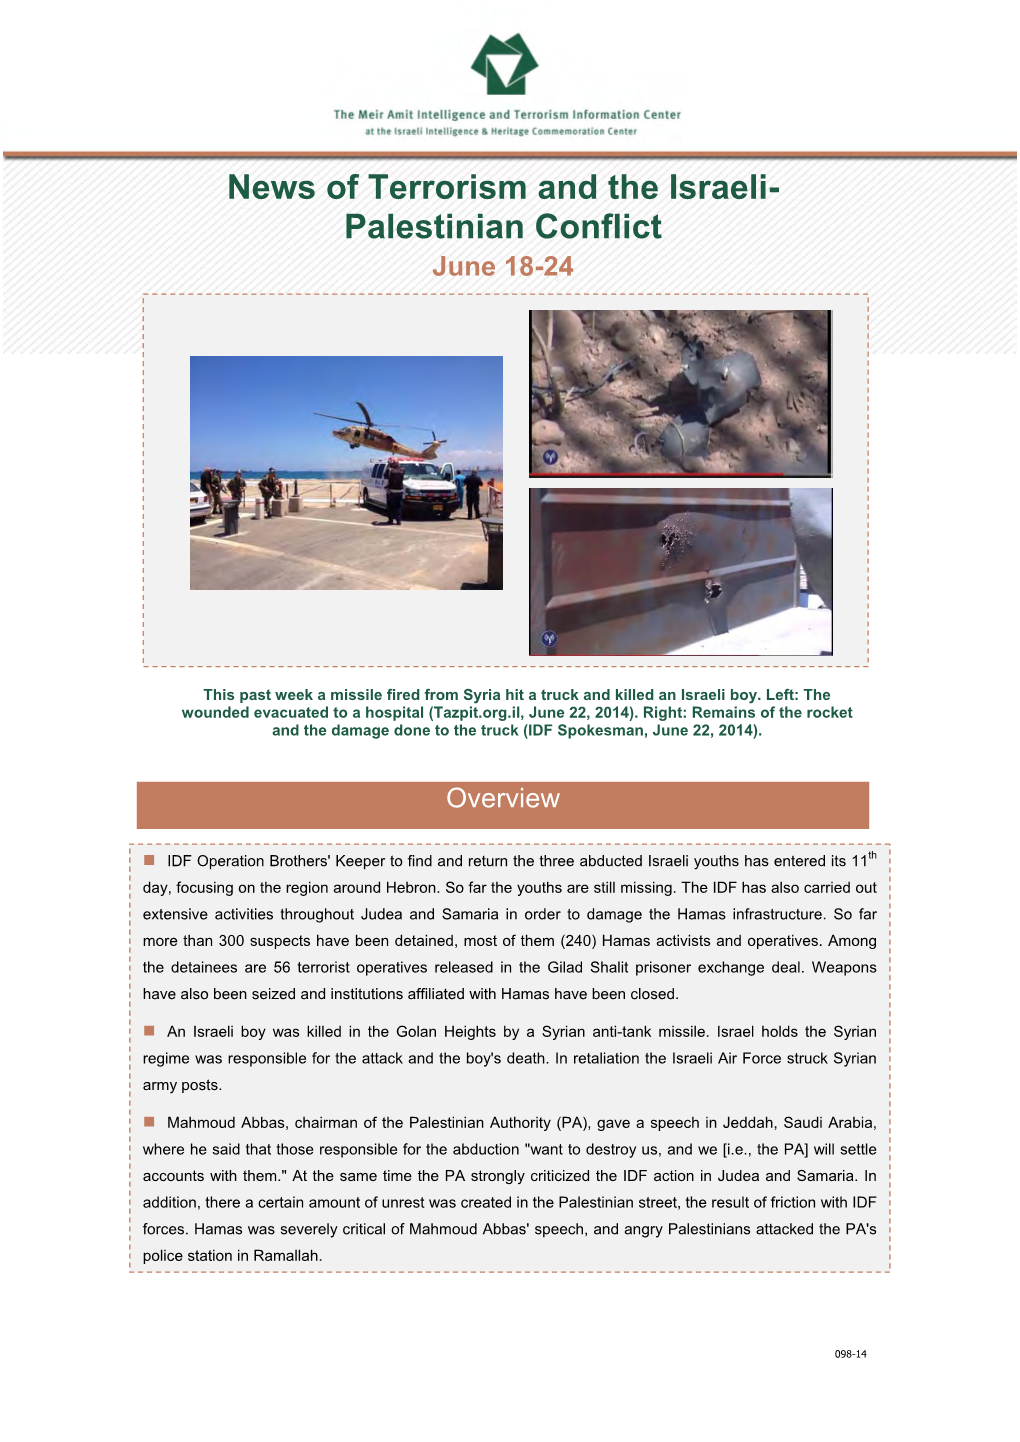 News of Terrorism and the Israeli-Palestinian Conflict